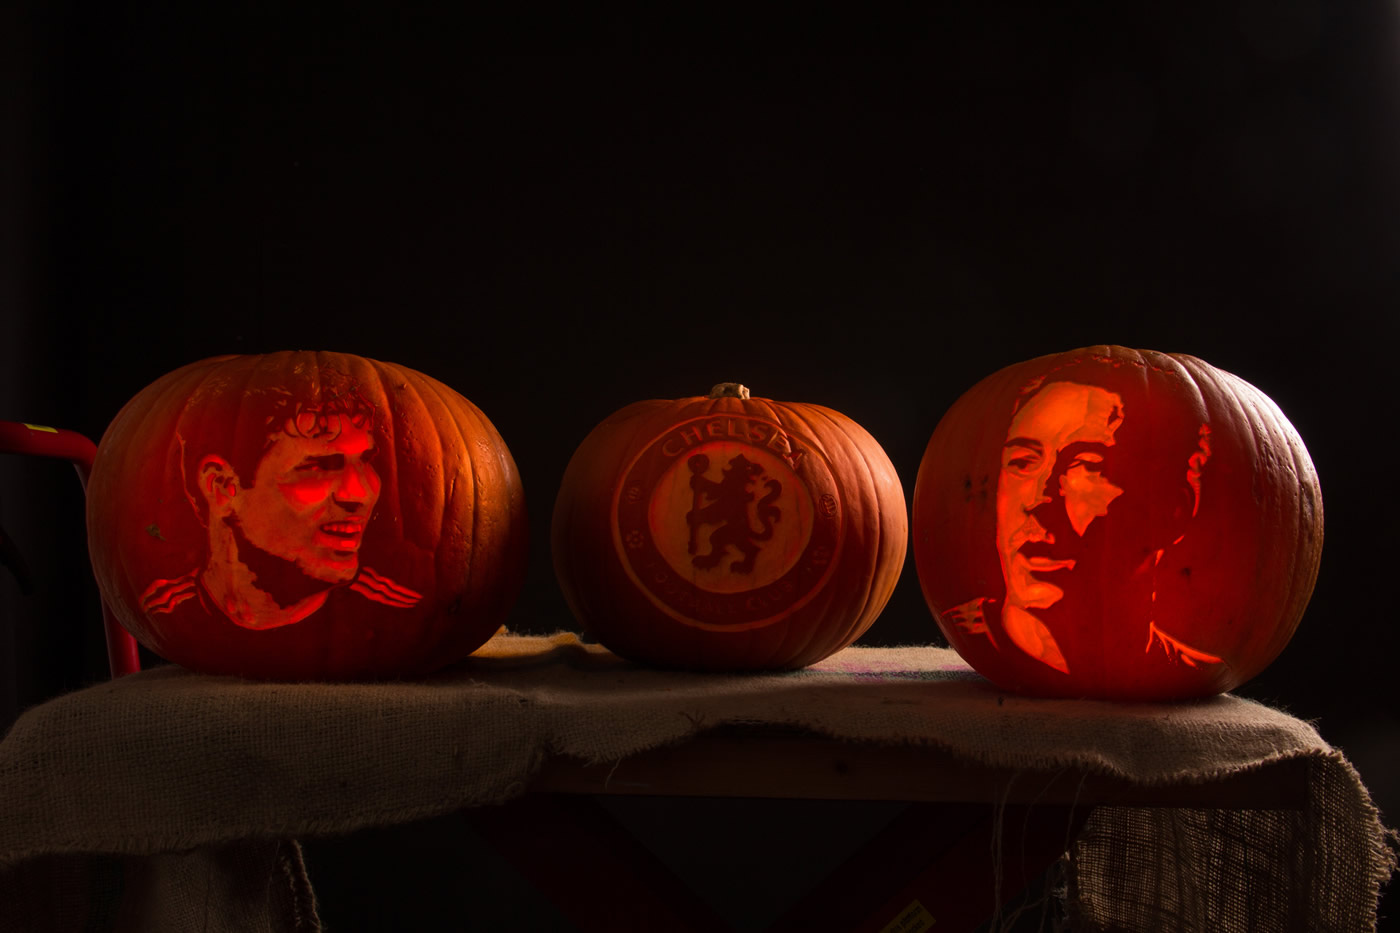 Footballers portraits carved into pumpkins | Sand In Your Eye